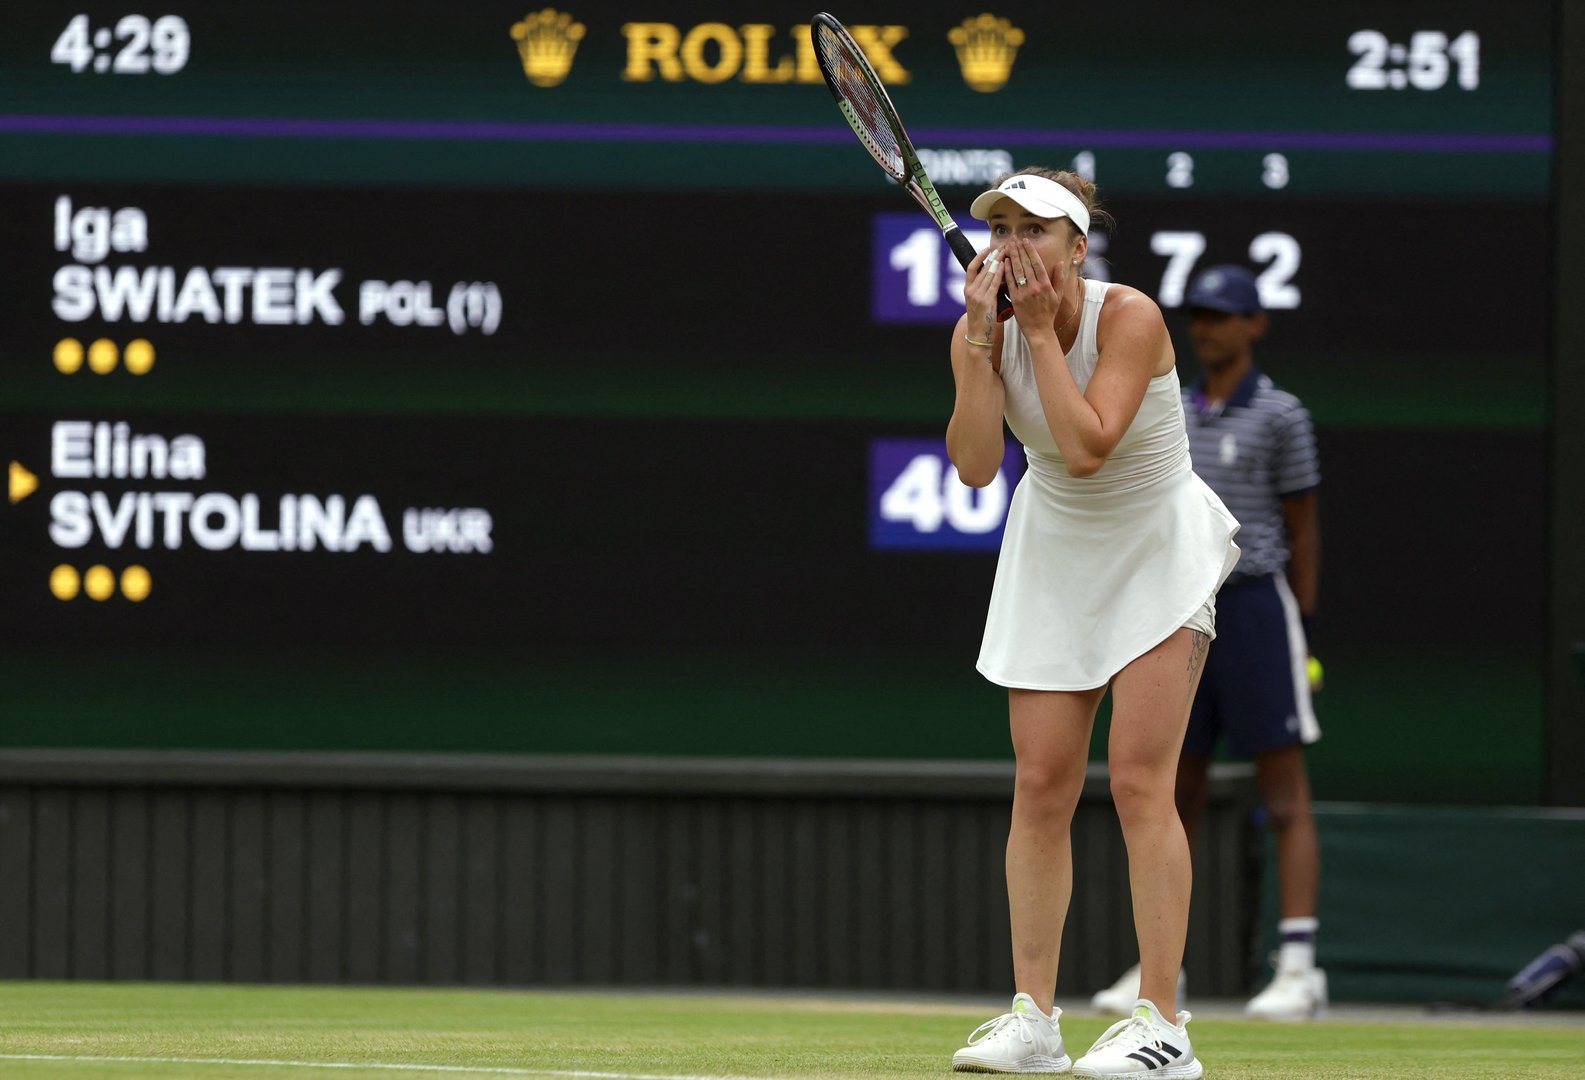 image Top seed Swiatek toppled by Svitolina in Wimbledon quarter-finals